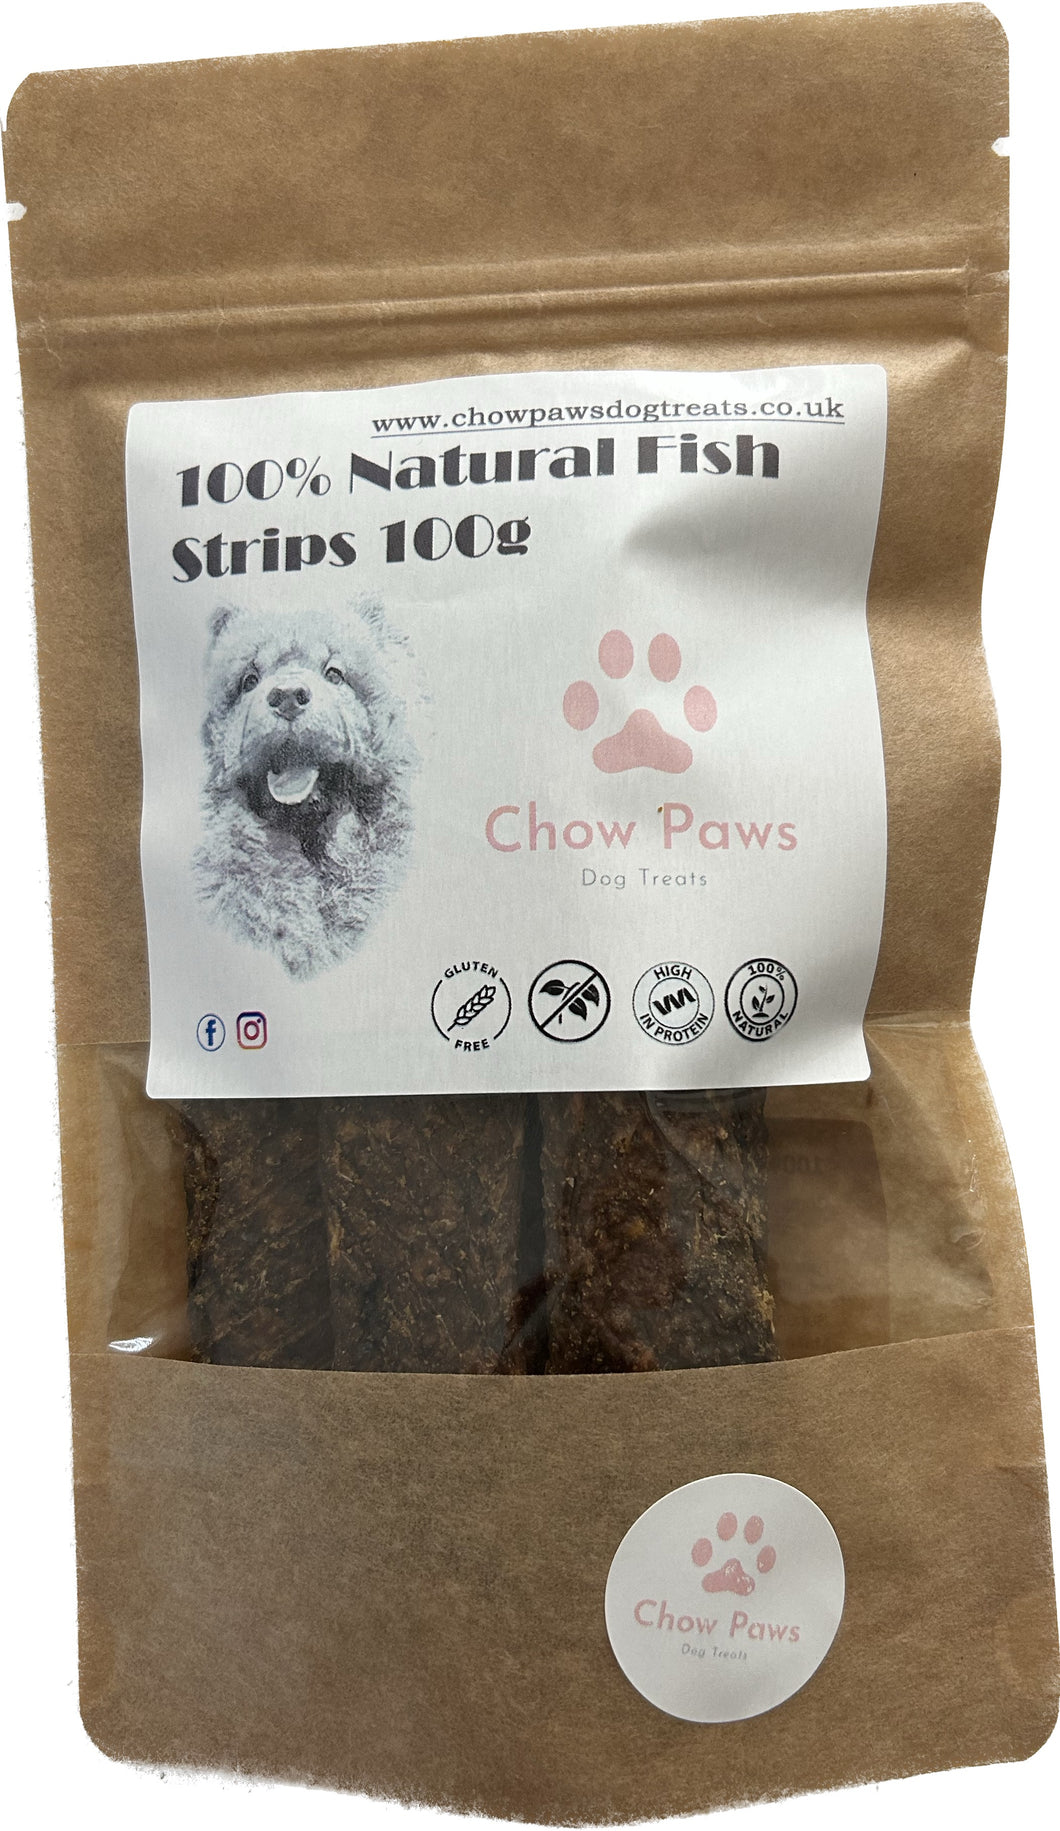 100% Natural Fish Meaty Strips 100g